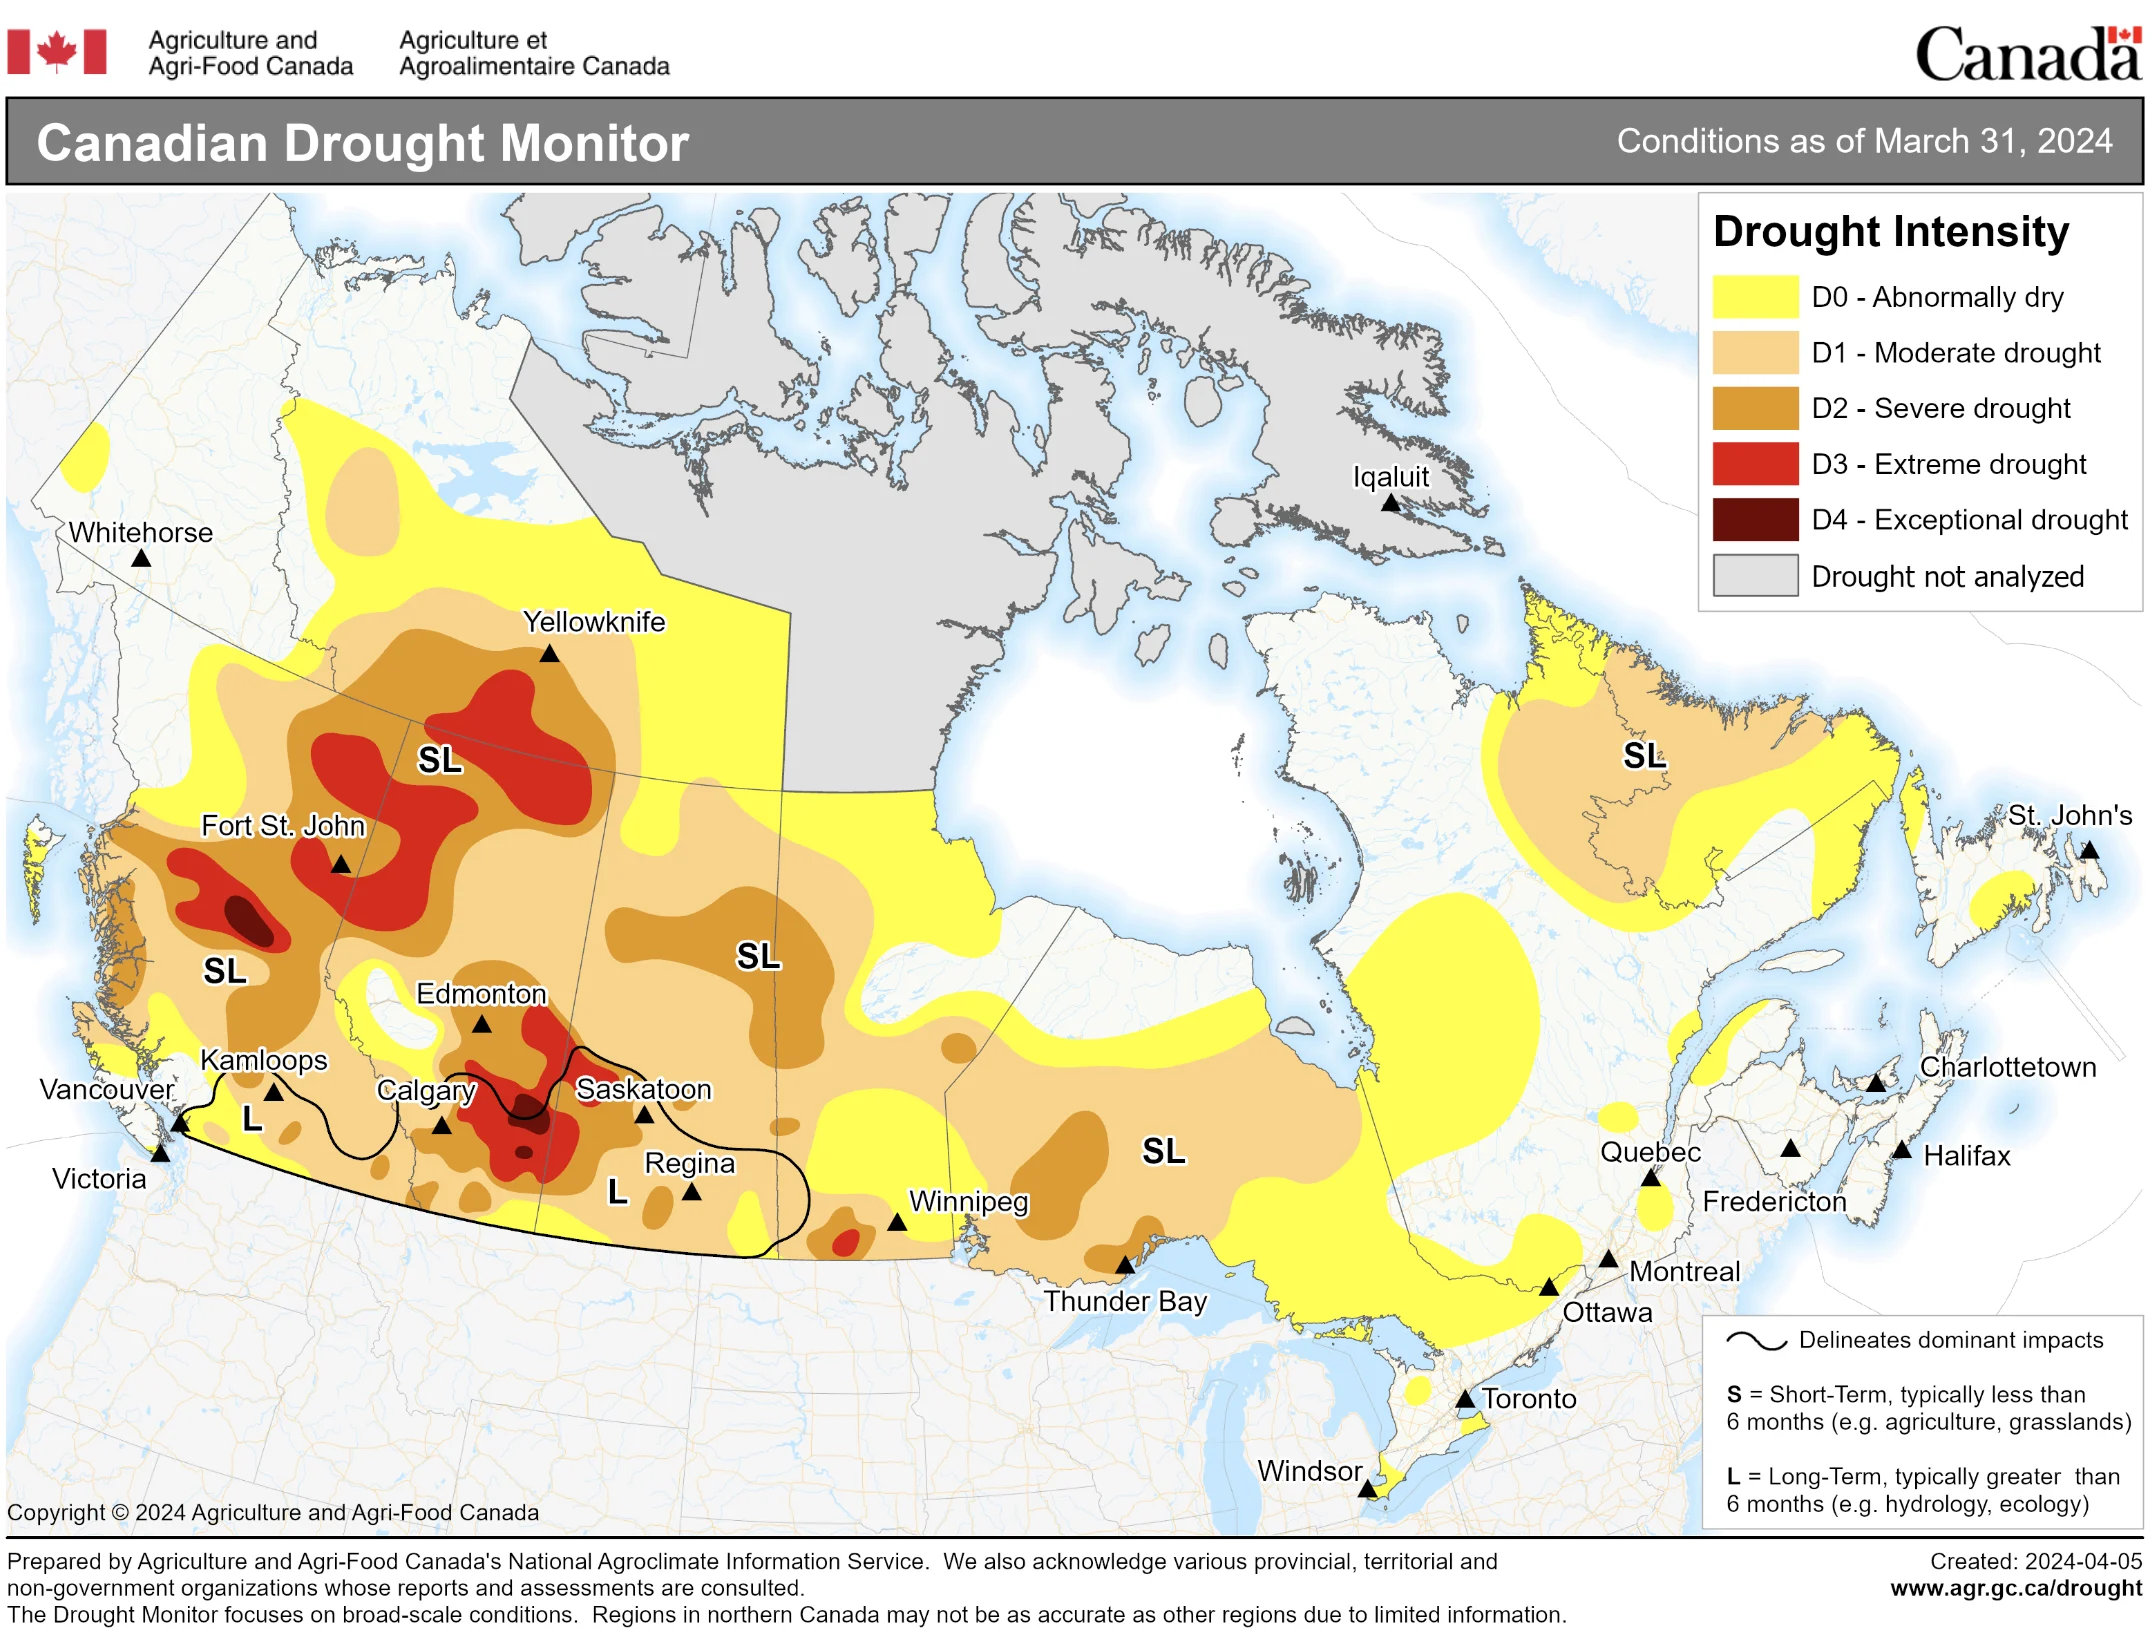 Canada's current drought conditions as of March 31, 2024